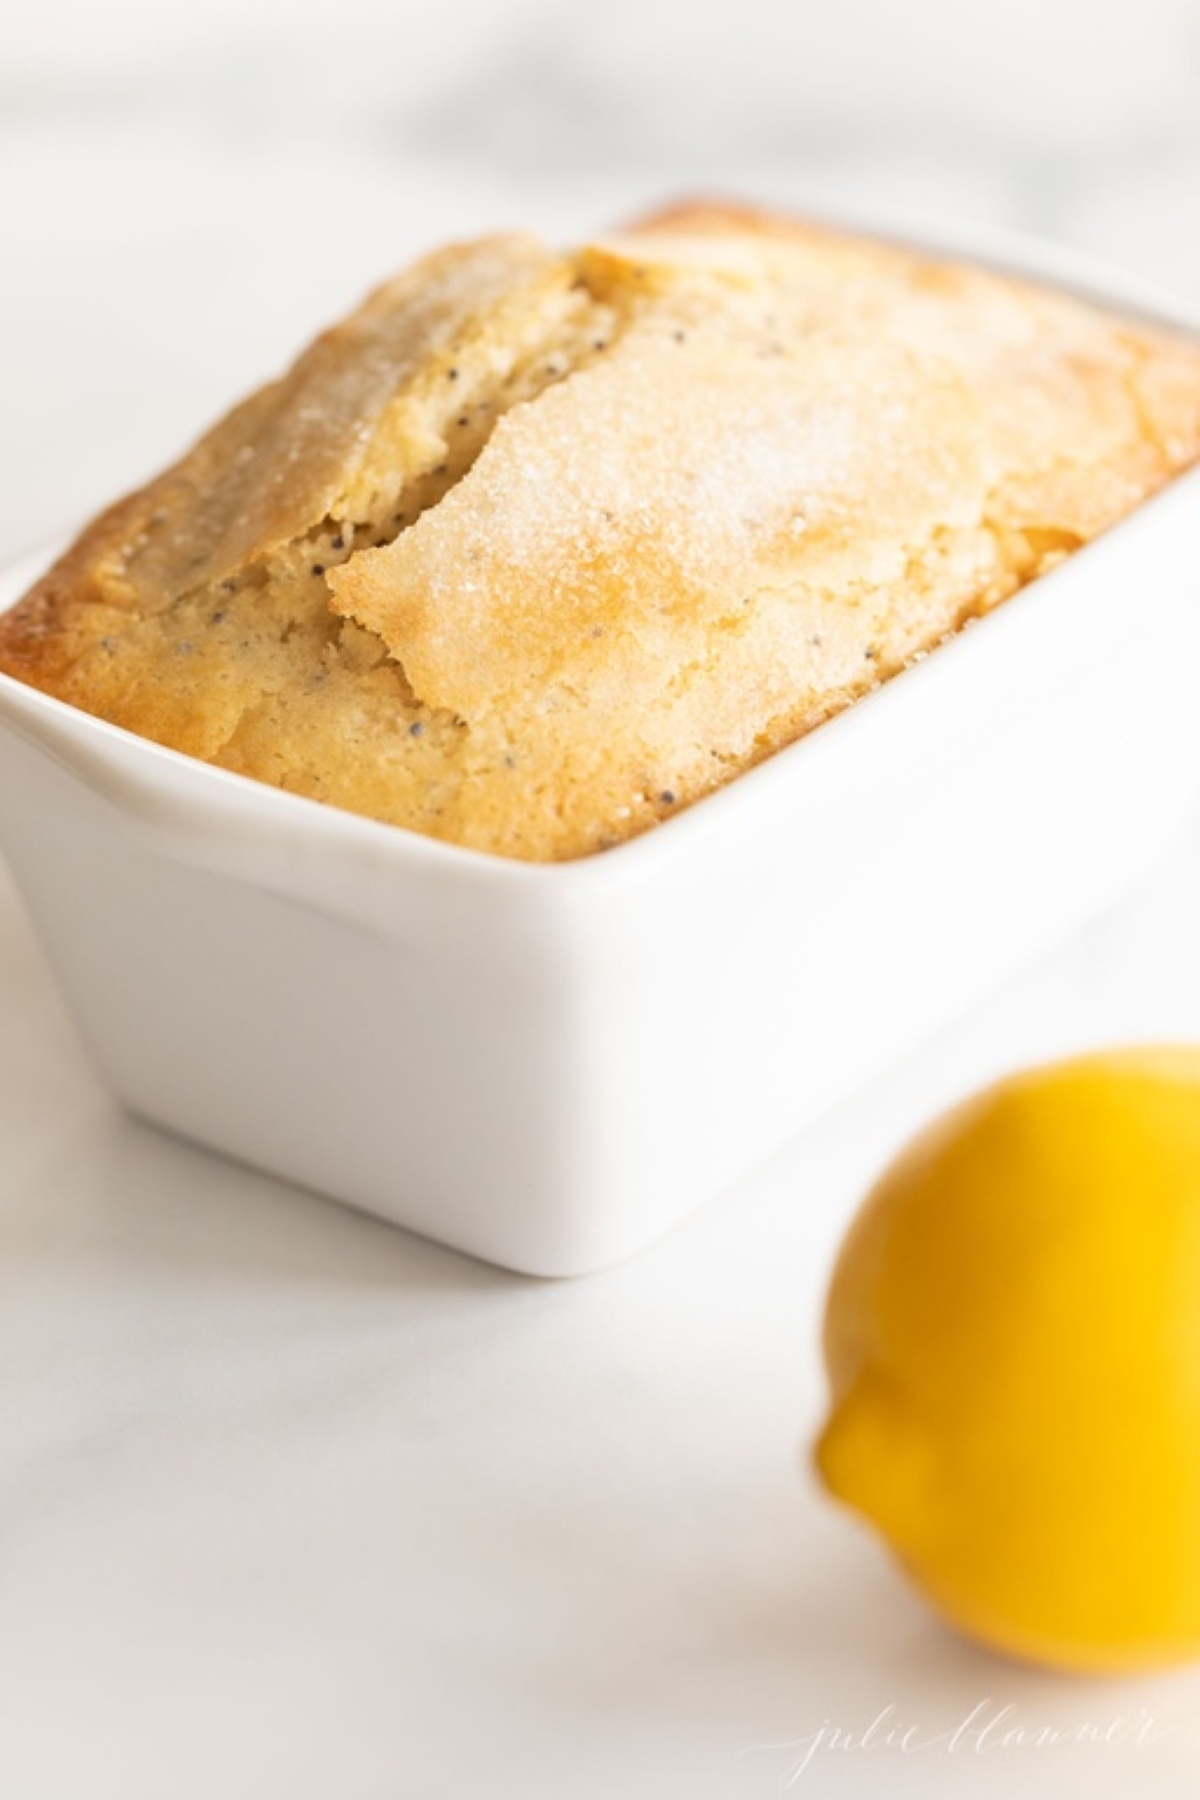 A small loaf of lemon poppy seed bread in a white ceramic loaf pan, with a lemon placed beside it.